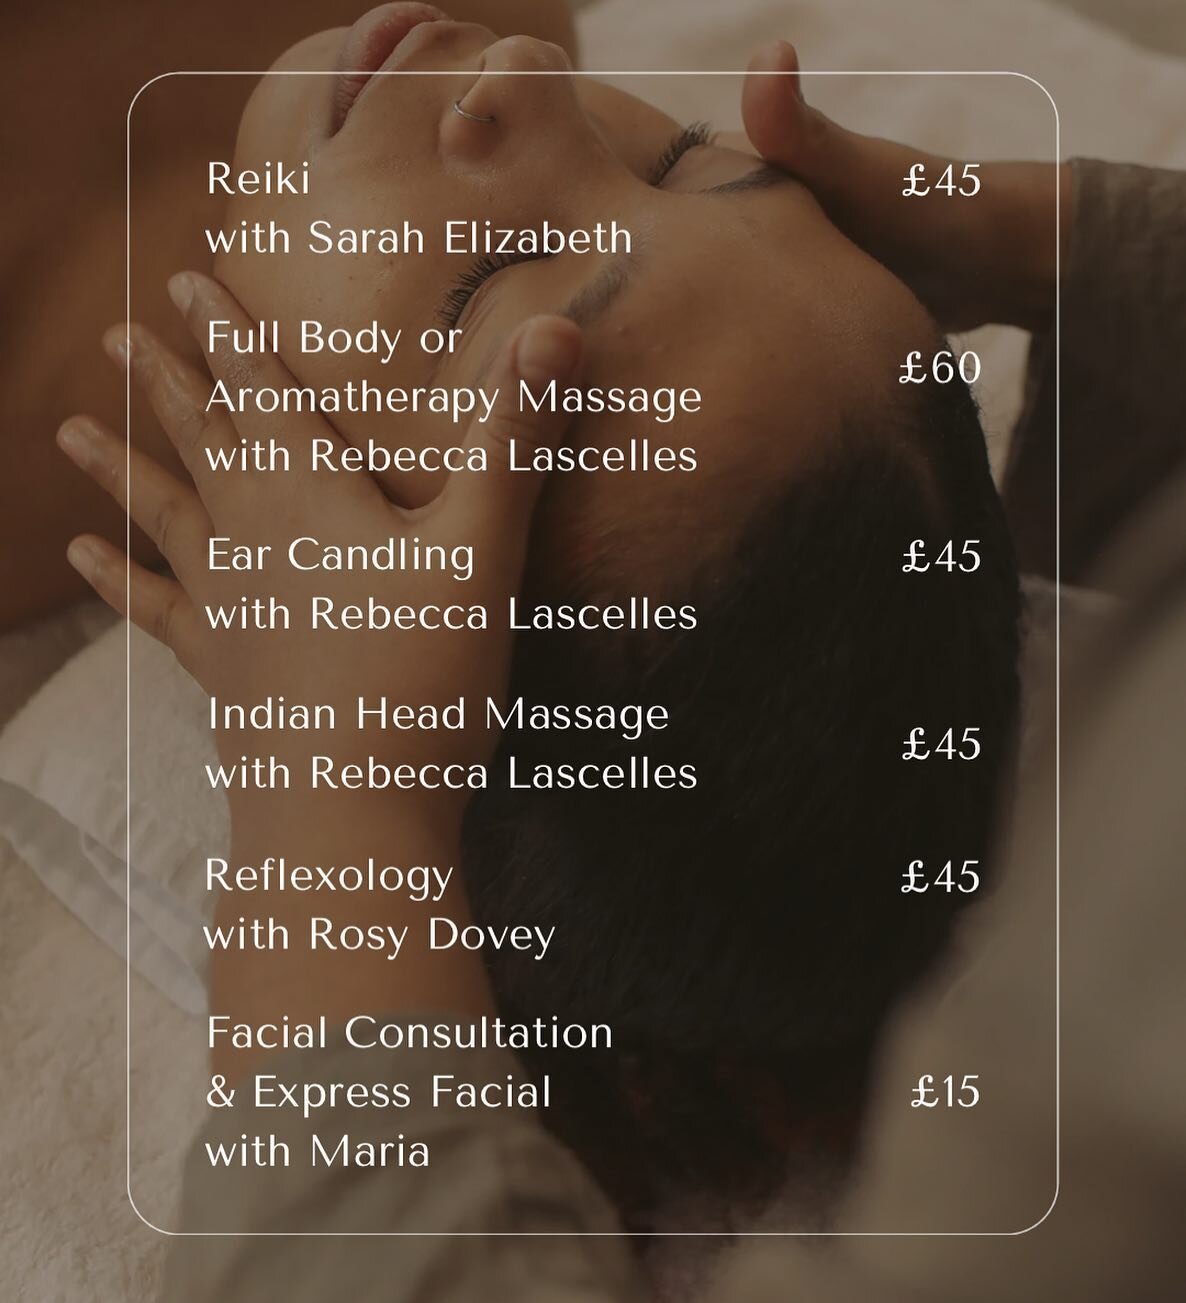 ✨ PRIVATE TREATMENTS at Holistic House ✨

Please book directly through the individual therapist:

&bull; Reiki with @journeying_with_sarahelizabeth - call 07983 899 995

&bull; Massage, Ear Candling or Indian Head Massage with @rebeccalascellescoachi